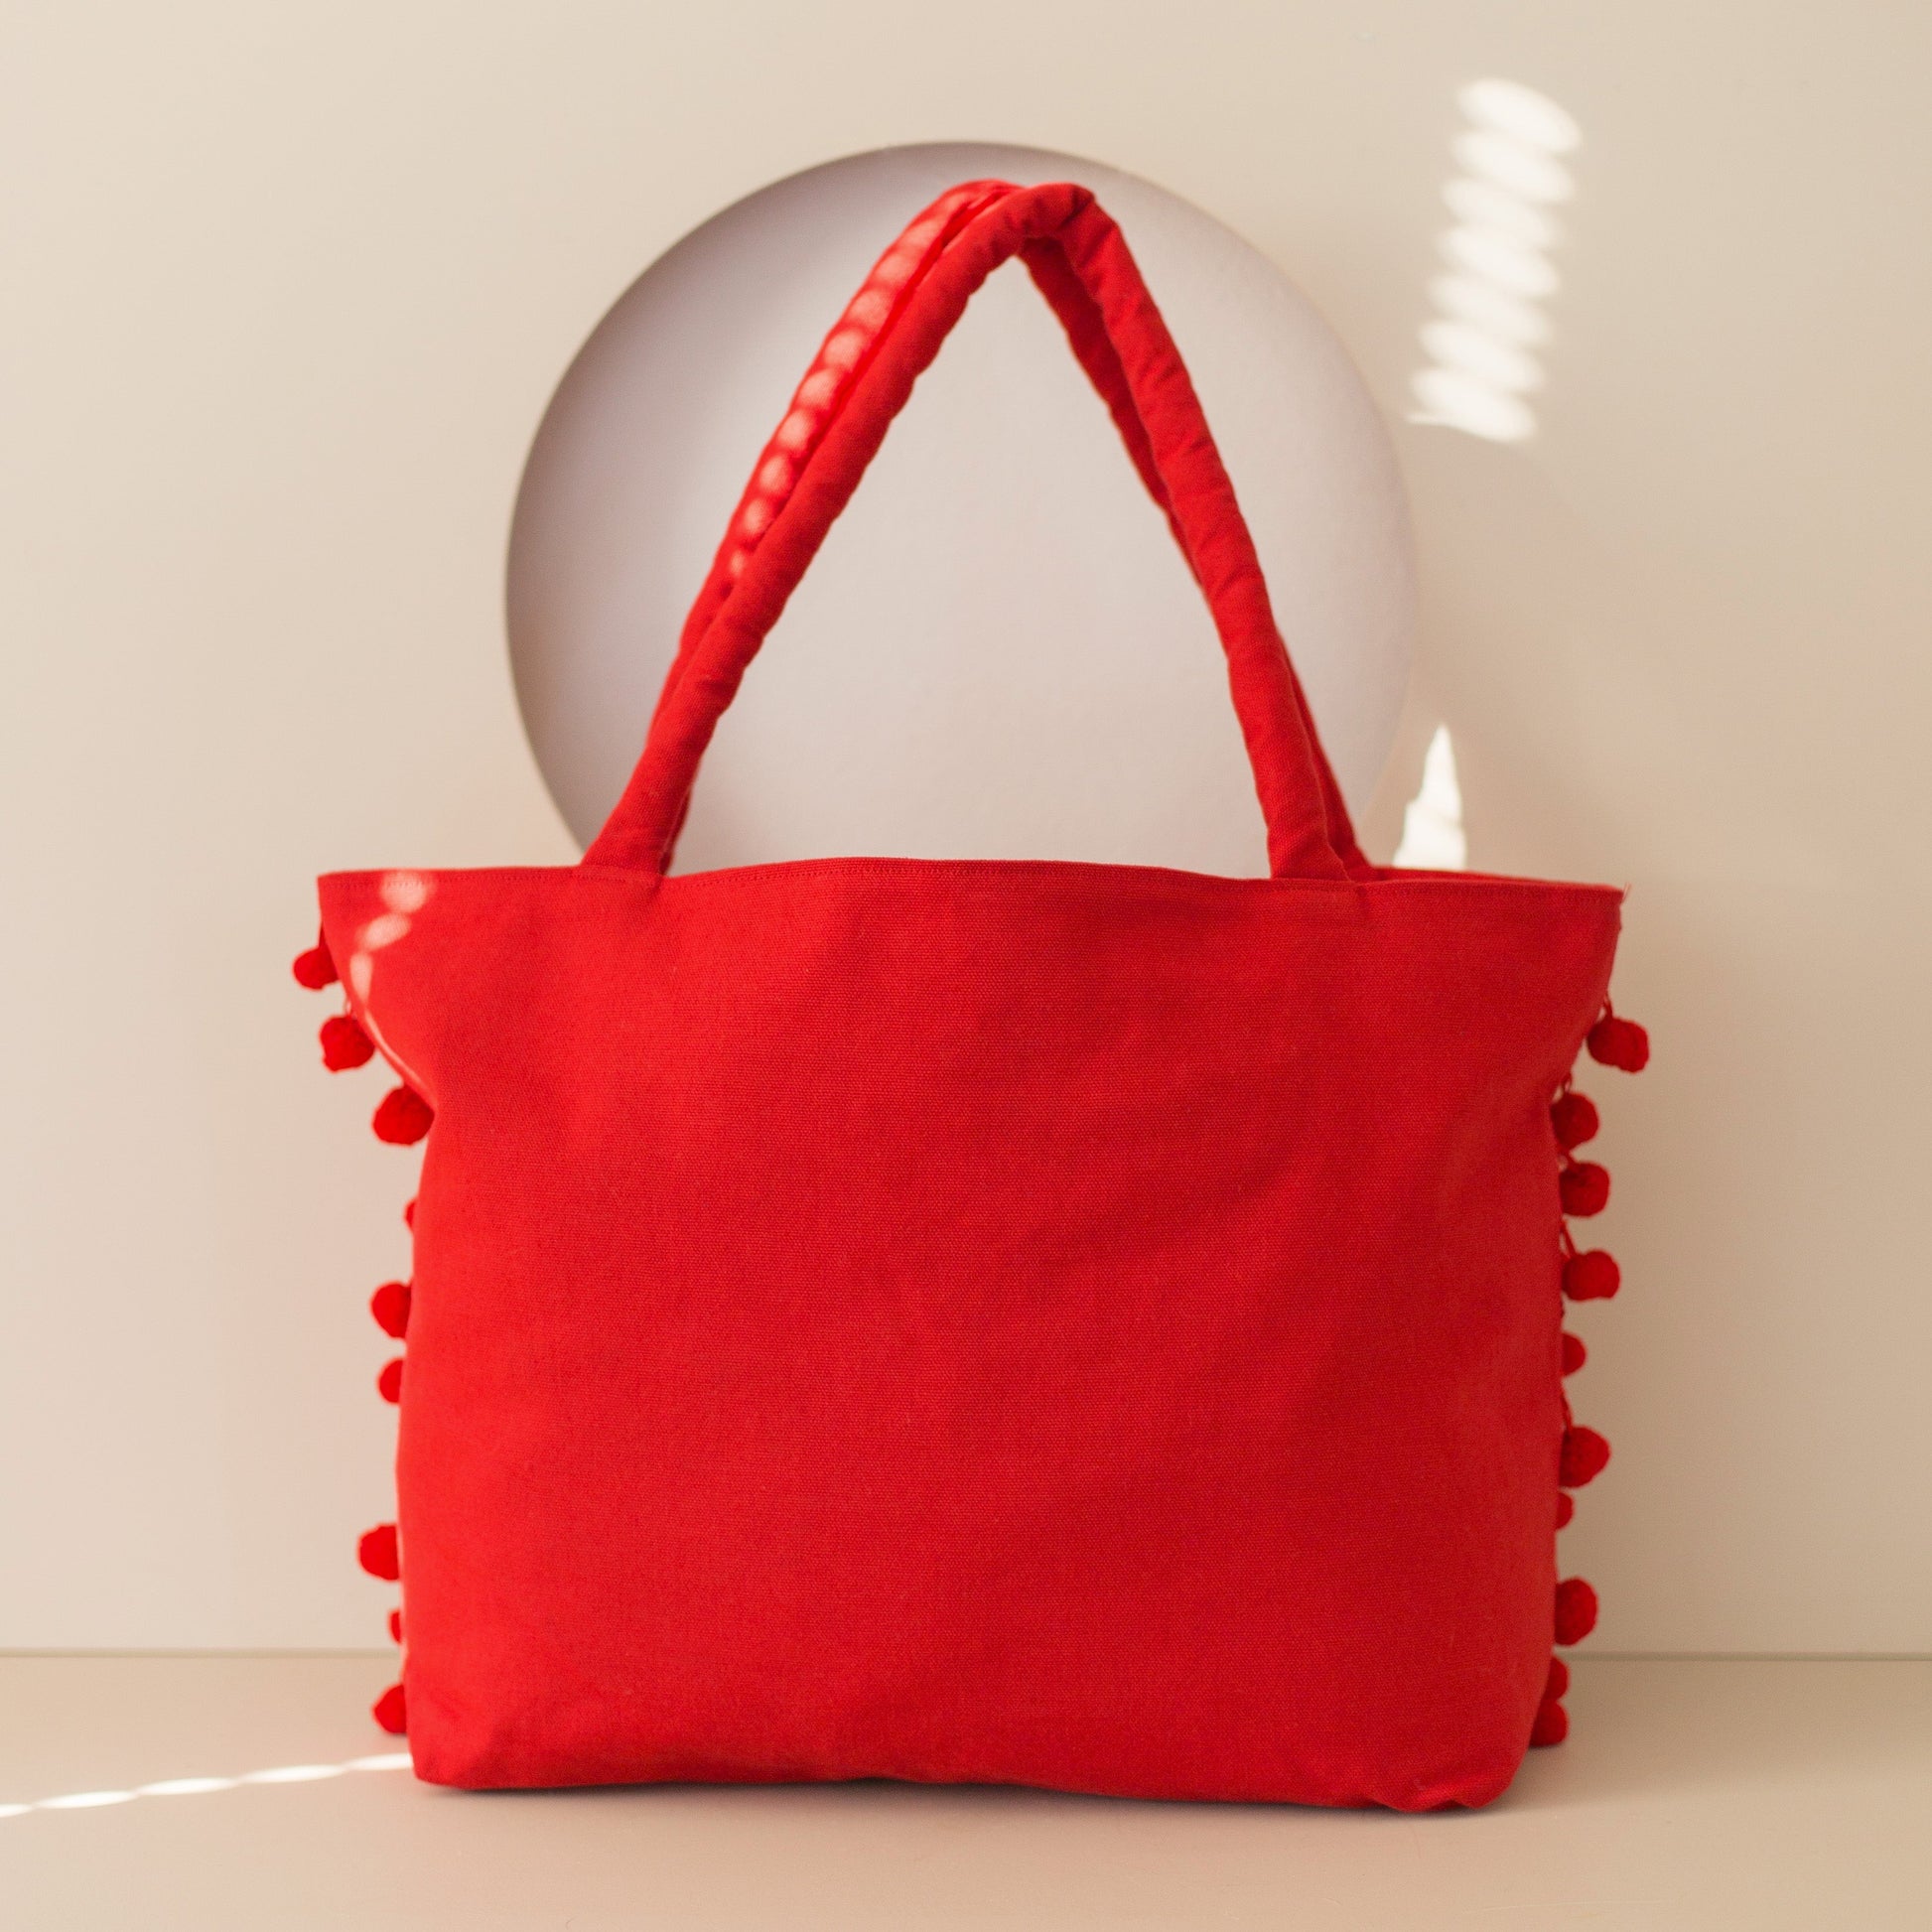 Ha Leh Pom Pom Tote in Red Bags and purses WEFTshop 